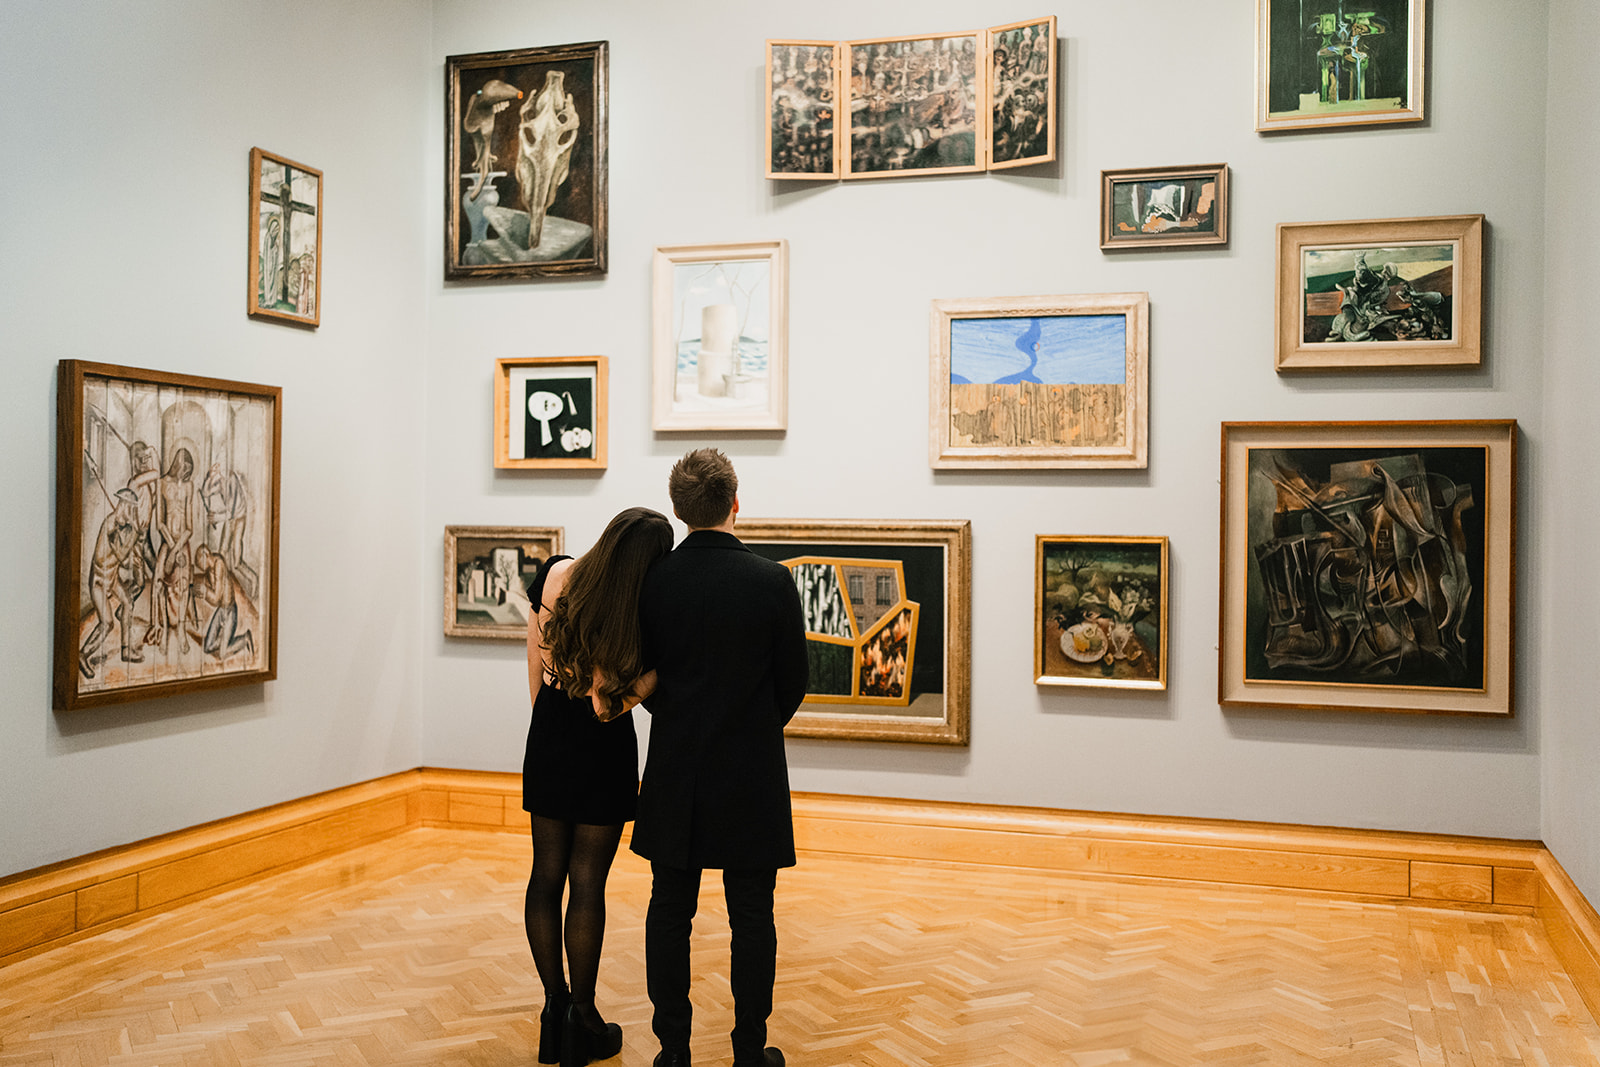 couple hugging each other amongst art work in an art gallery